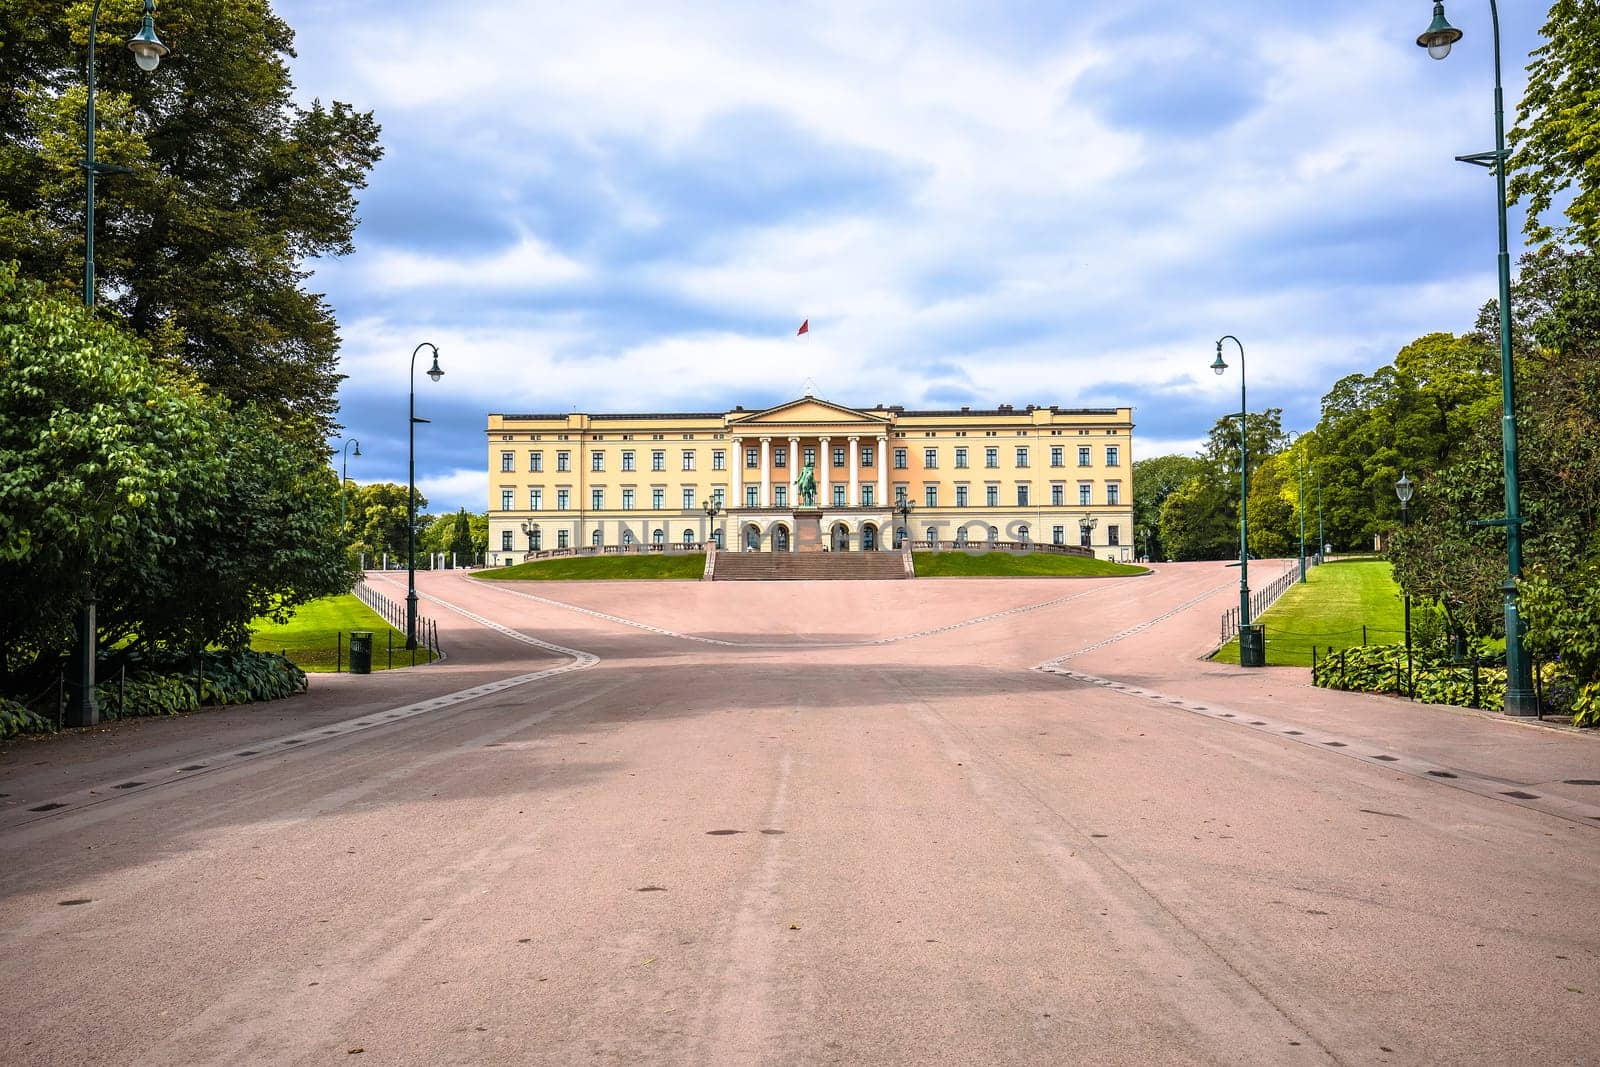 The Royal Palace of Norway in Oslo view, Kingdom of Norway